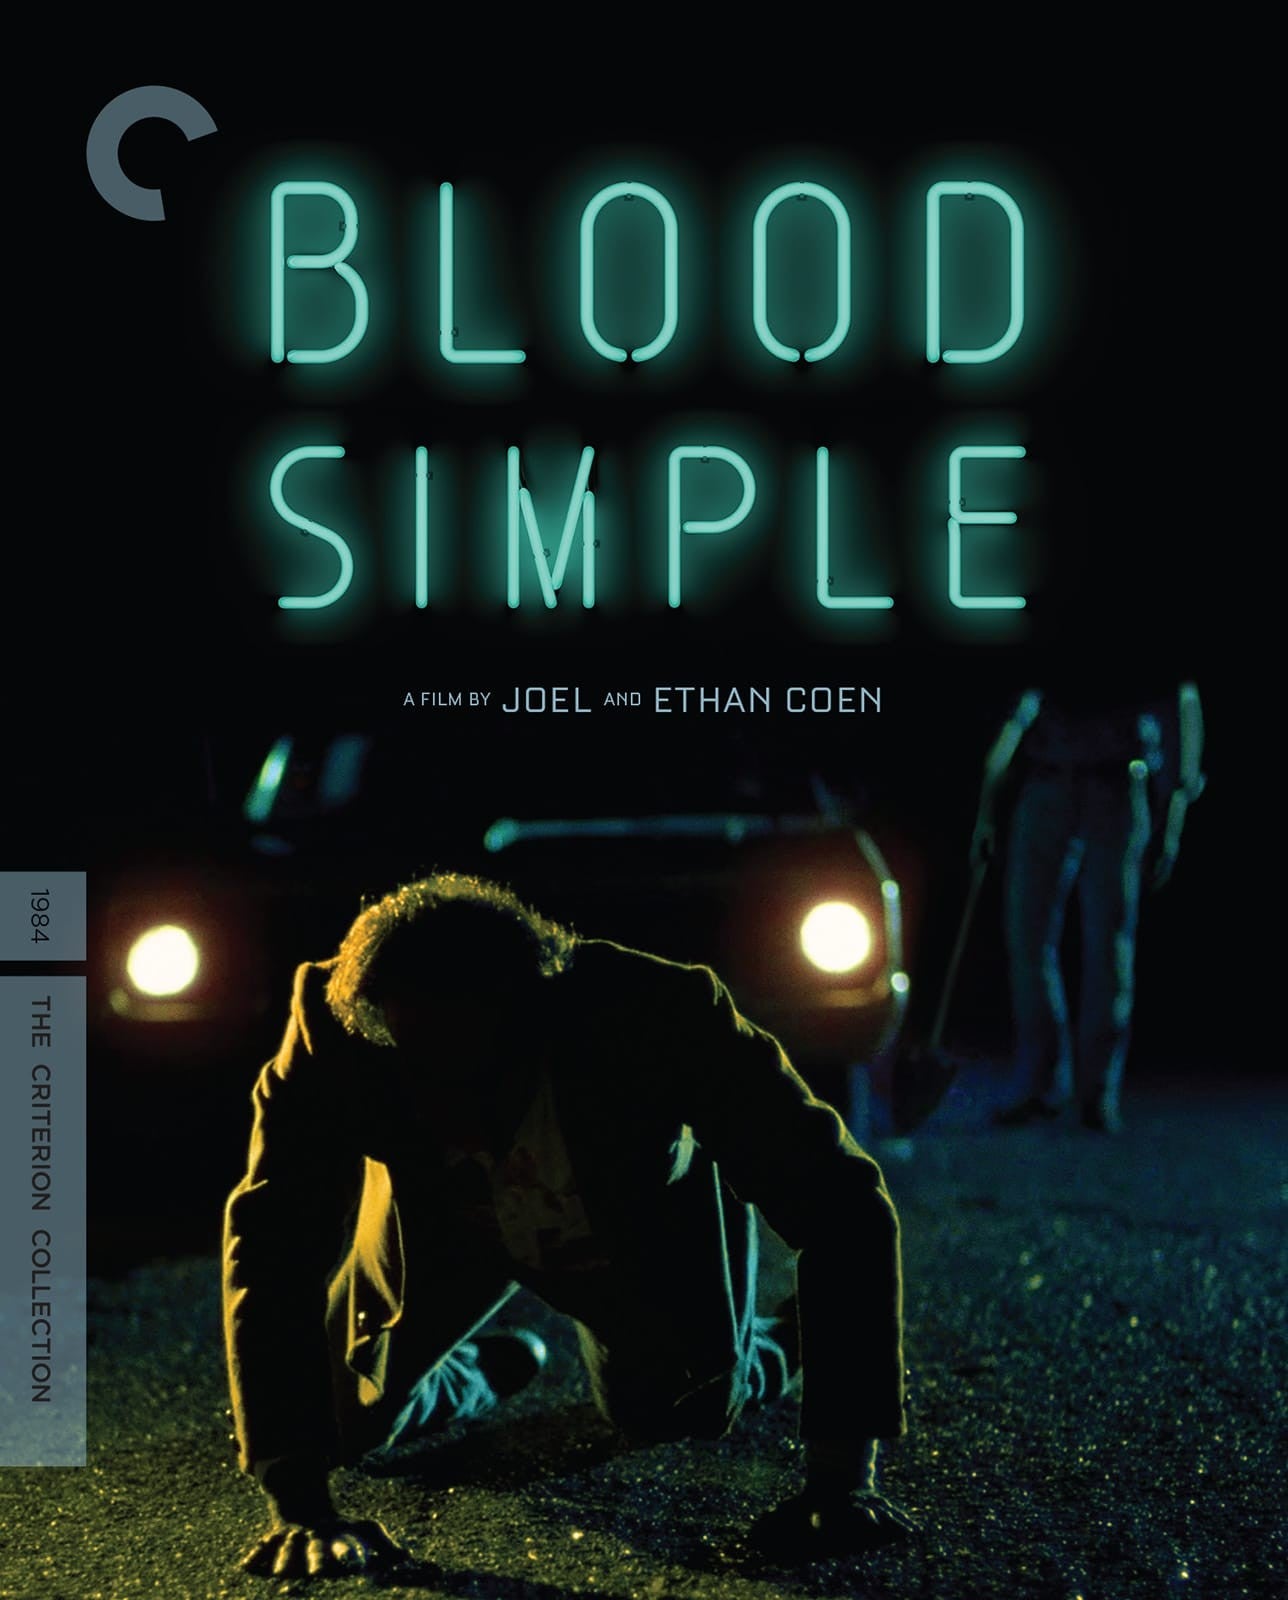 Blood Simple The Criterion Collection 4K UHD/Blu-Ray [PRE-ORDER]